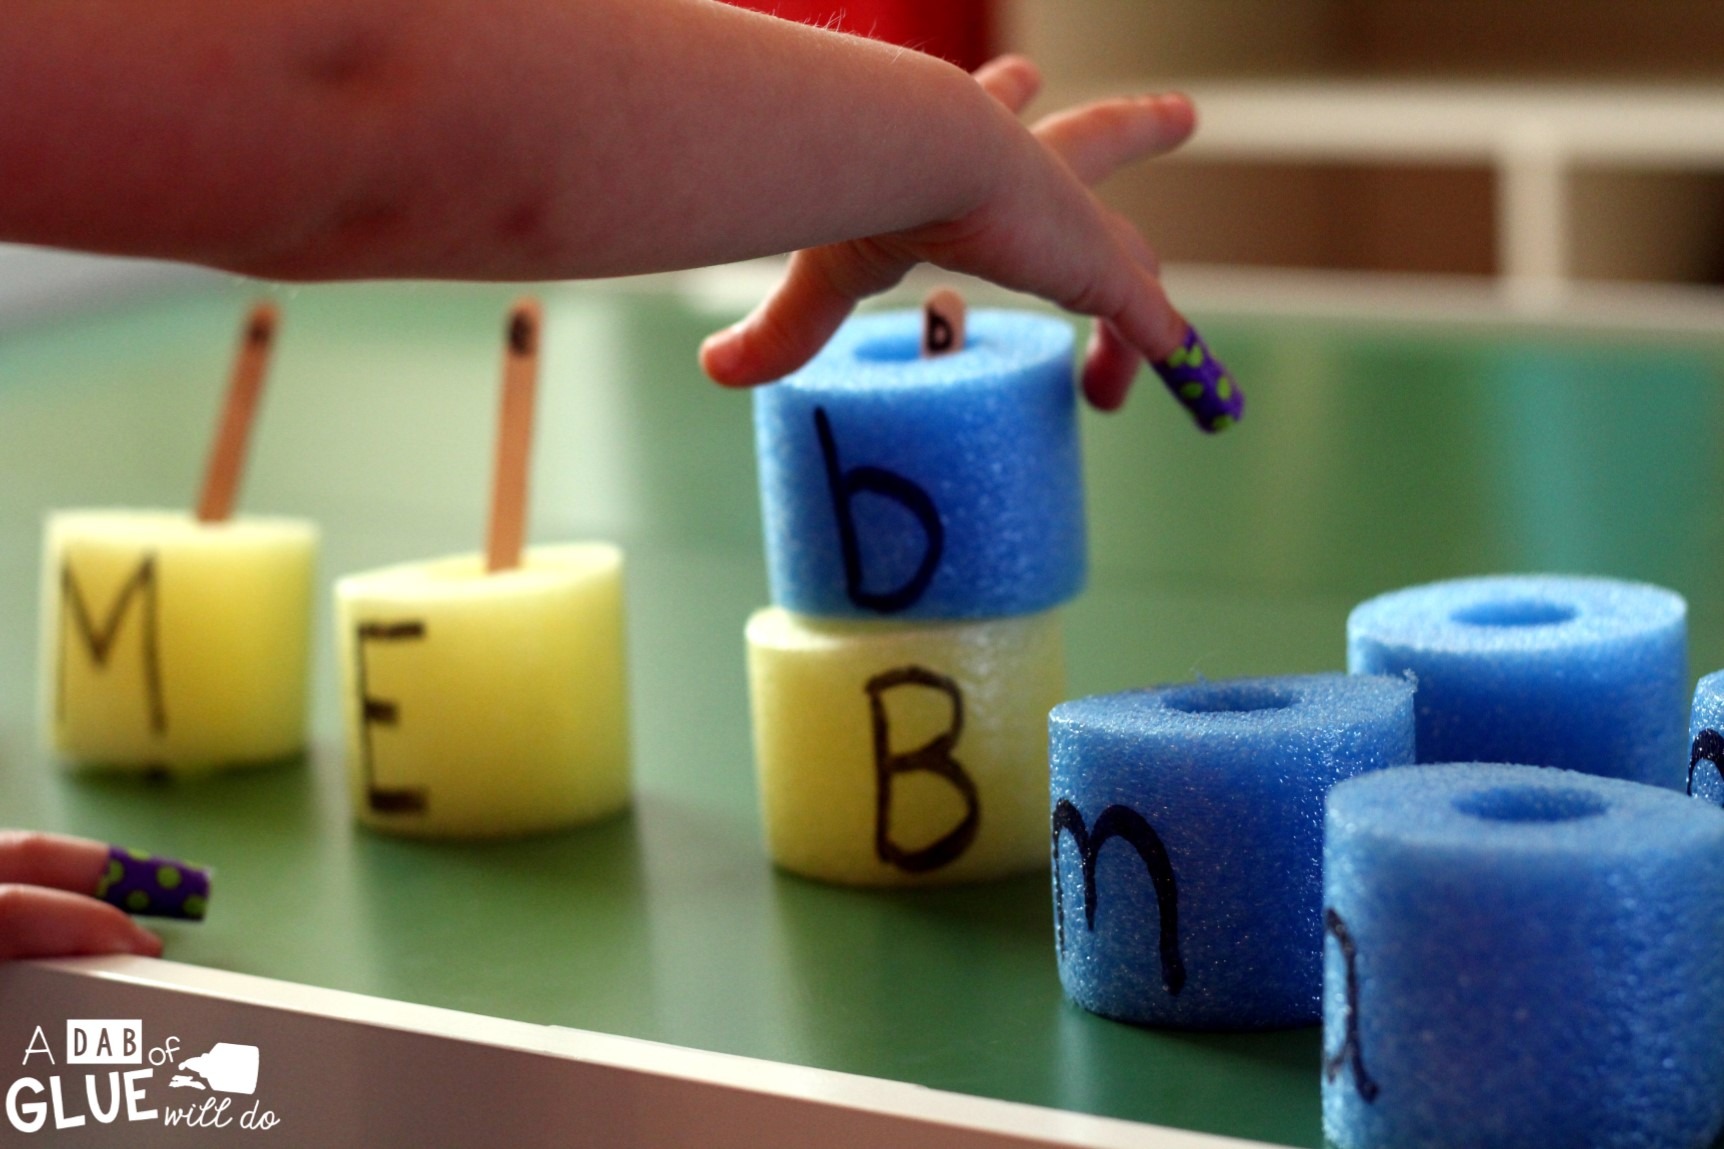 Summertime is almost over, which means pool noodles will be on SALE everywhere so why not go grab a few for cheap and use them for an educational purpose?! We have been working on letters the last few weeks before my oldest heads off to preschool and I thought the pool noodle alphabet match would be a great way for her to practice matching uppercase and lowercase letters.